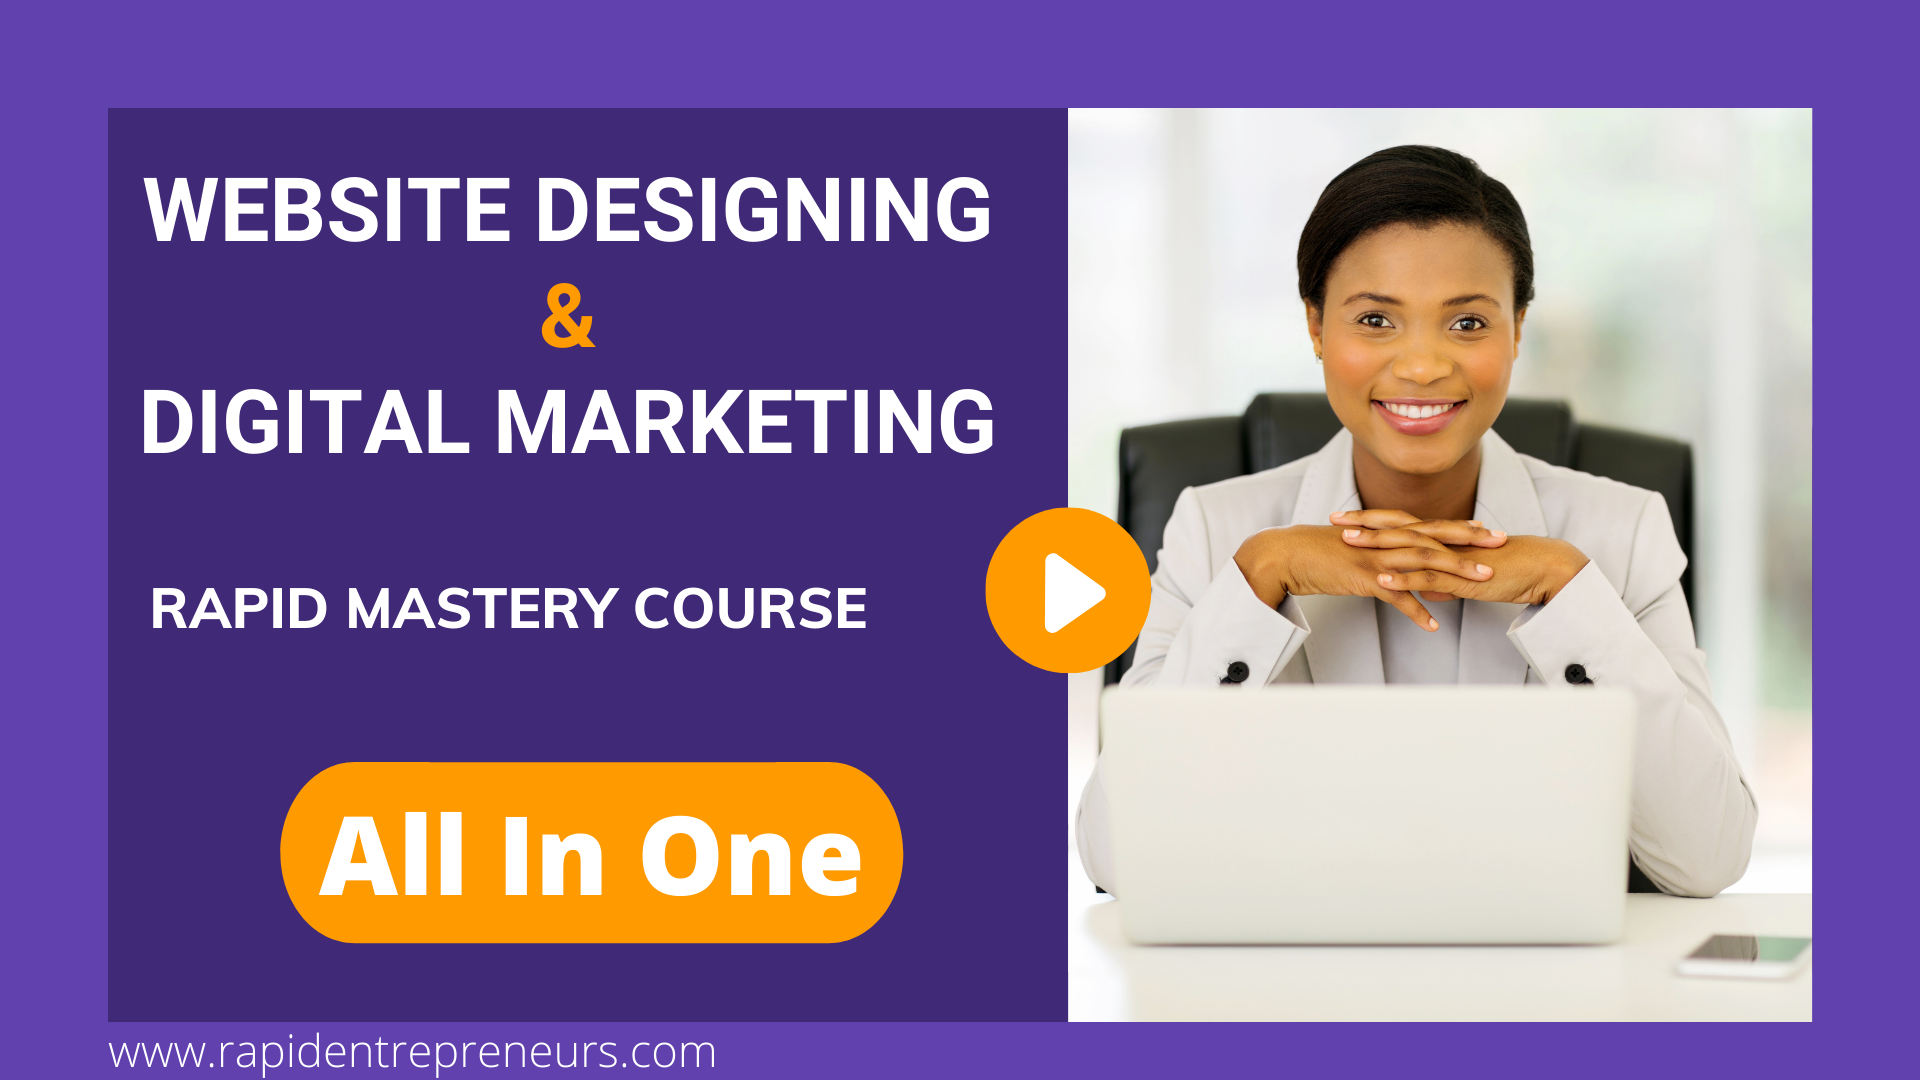 Rapid Mastery Course – All In One